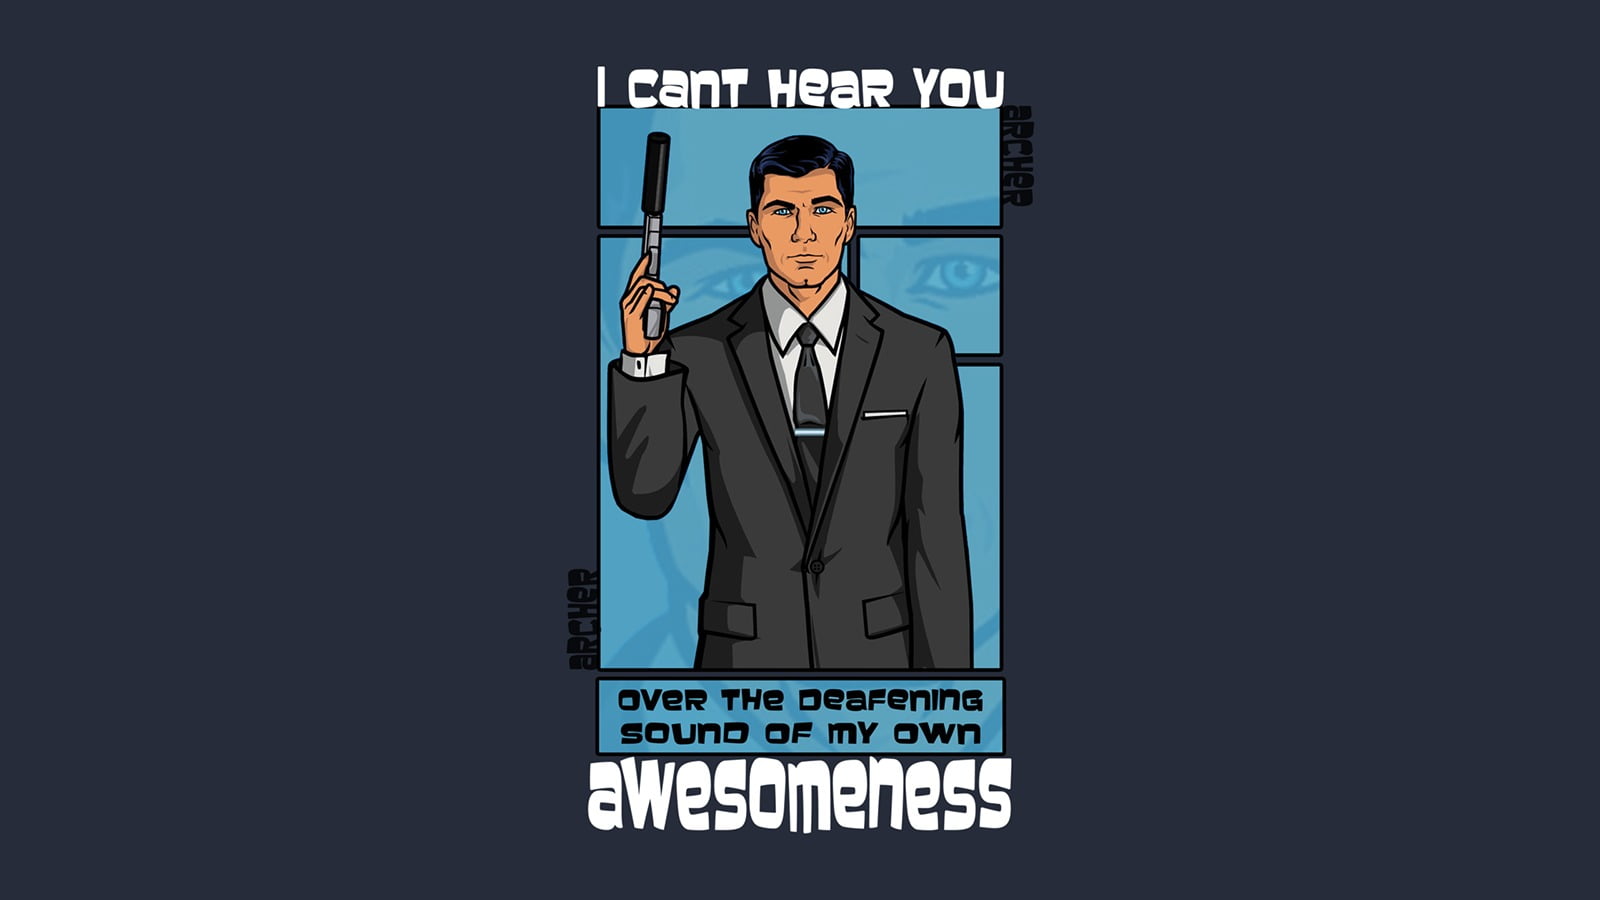 i cant hear your awesomeness memes, Archer (TV show), males, business person